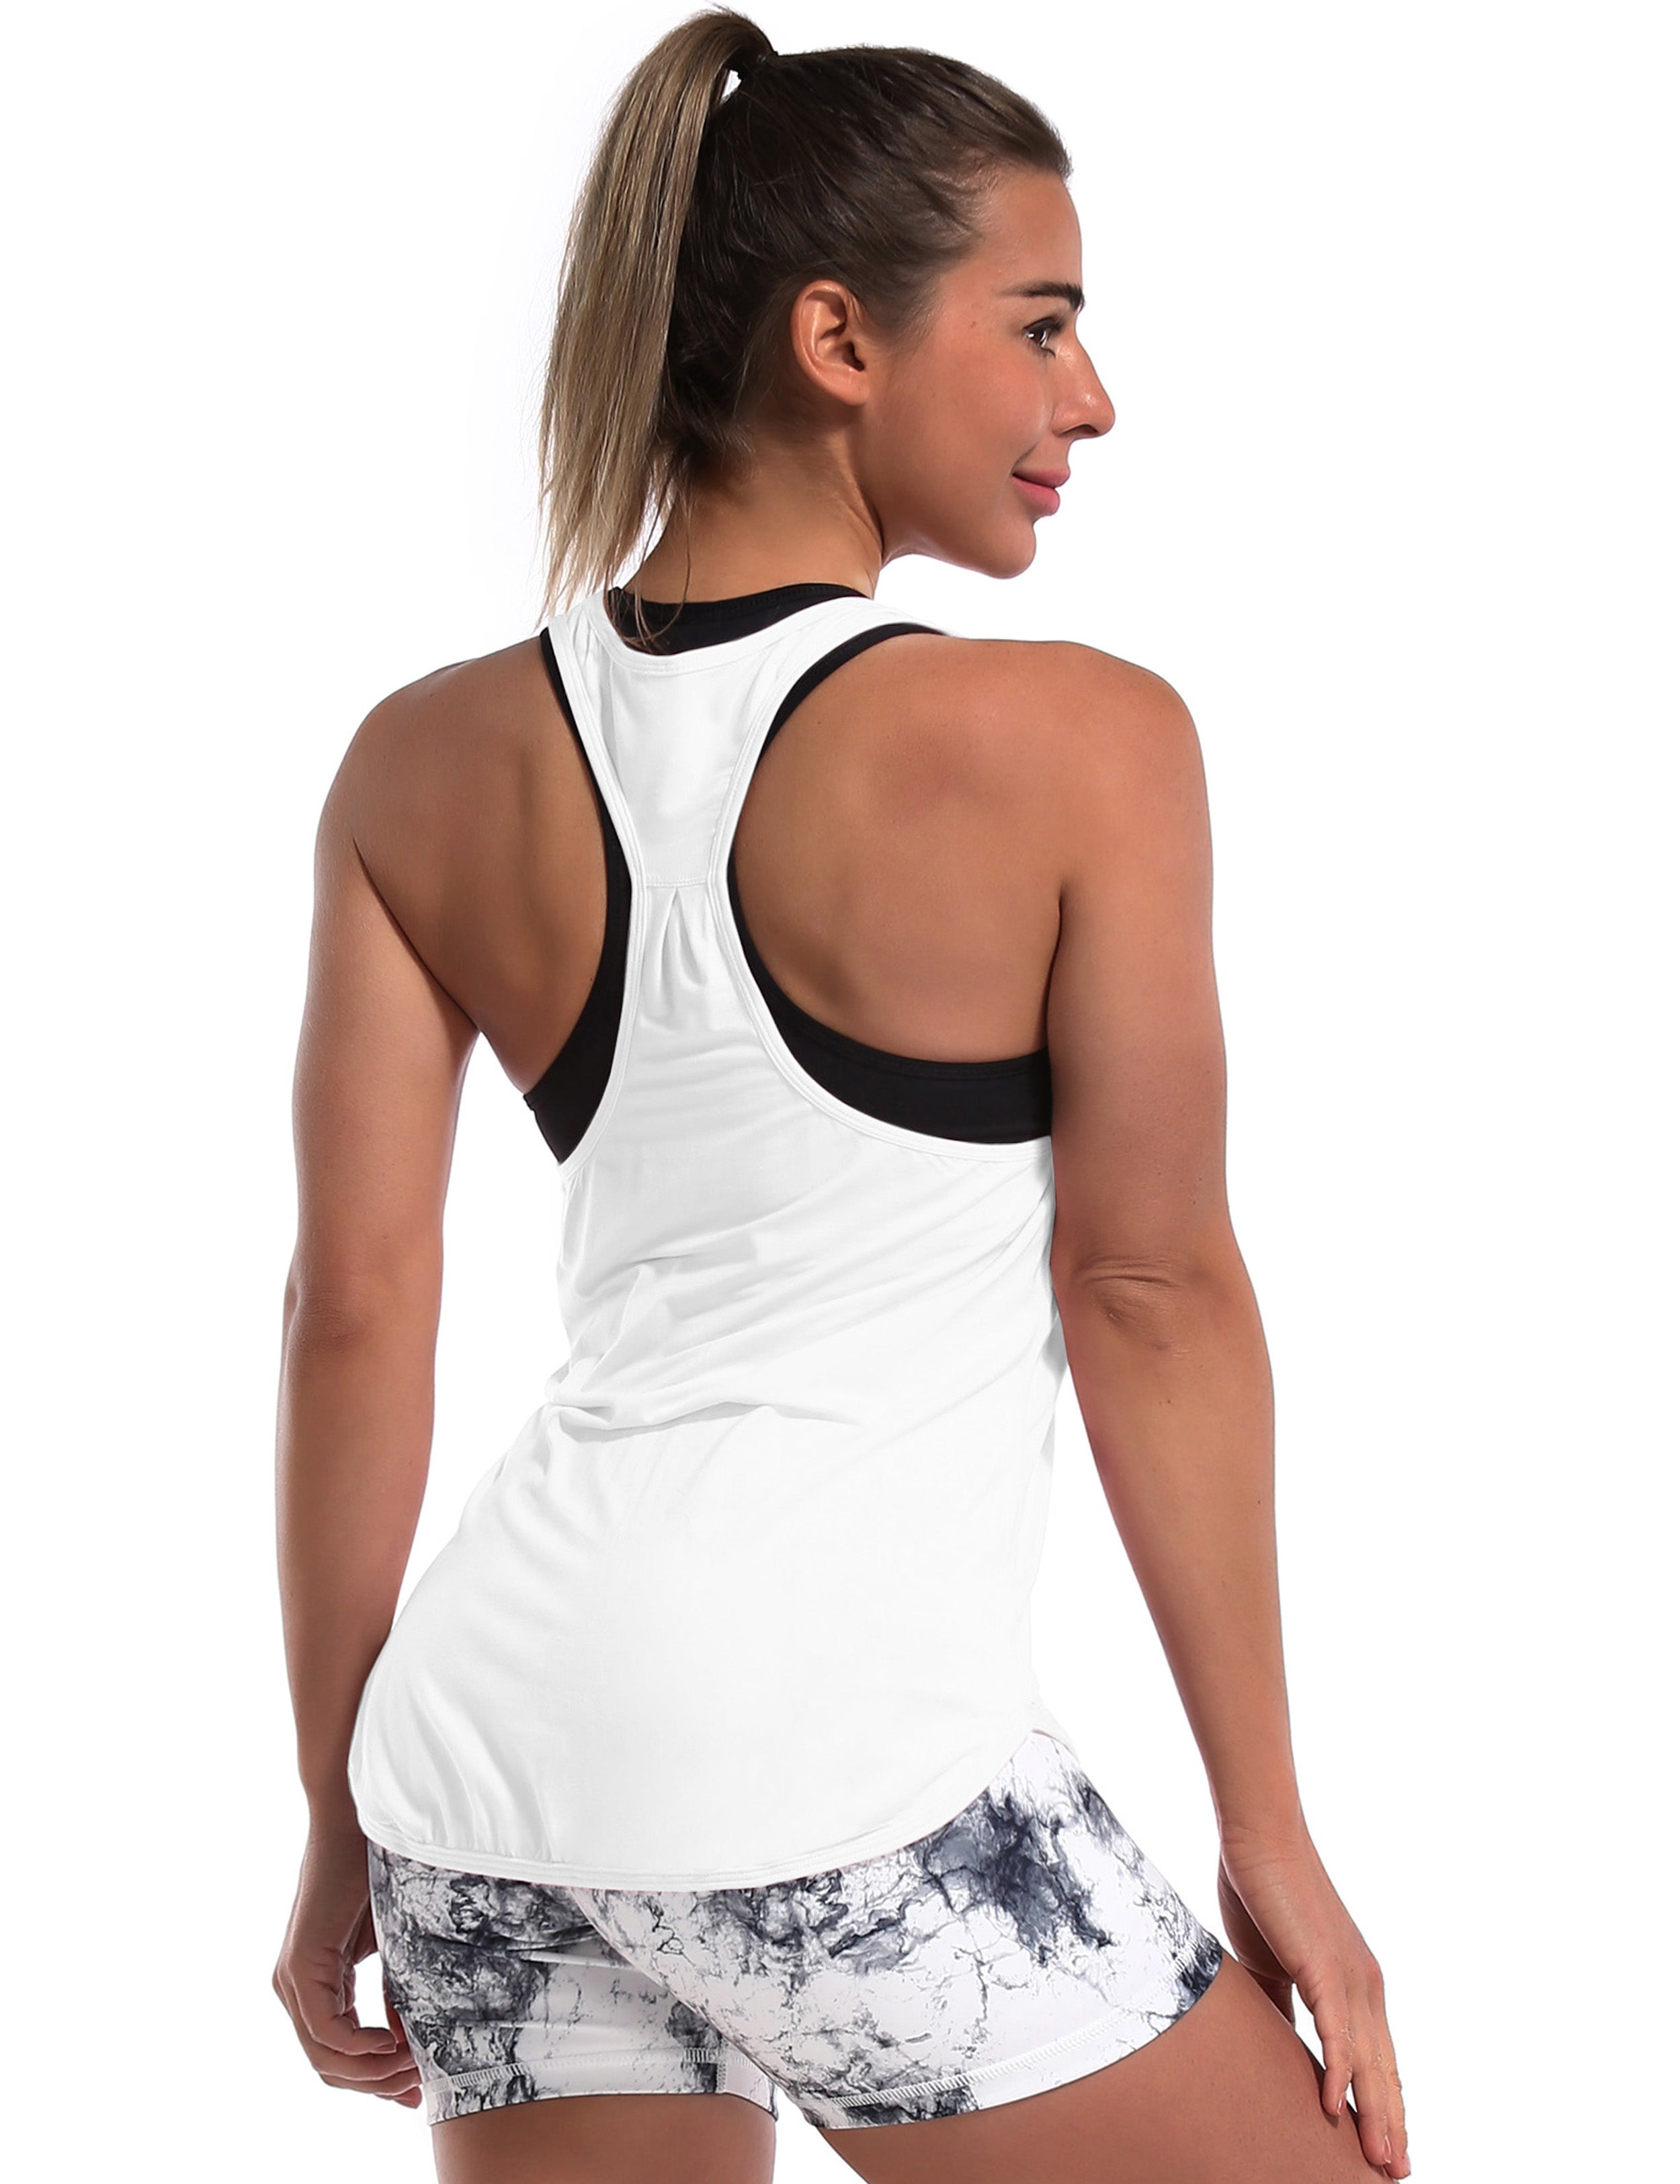 Loose Fit Racerback Tank Top white Designed for On the Move Loose fit 93%Modal/7%Spandex Four-way stretch Naturally breathable Super-Soft, Modal Fabric